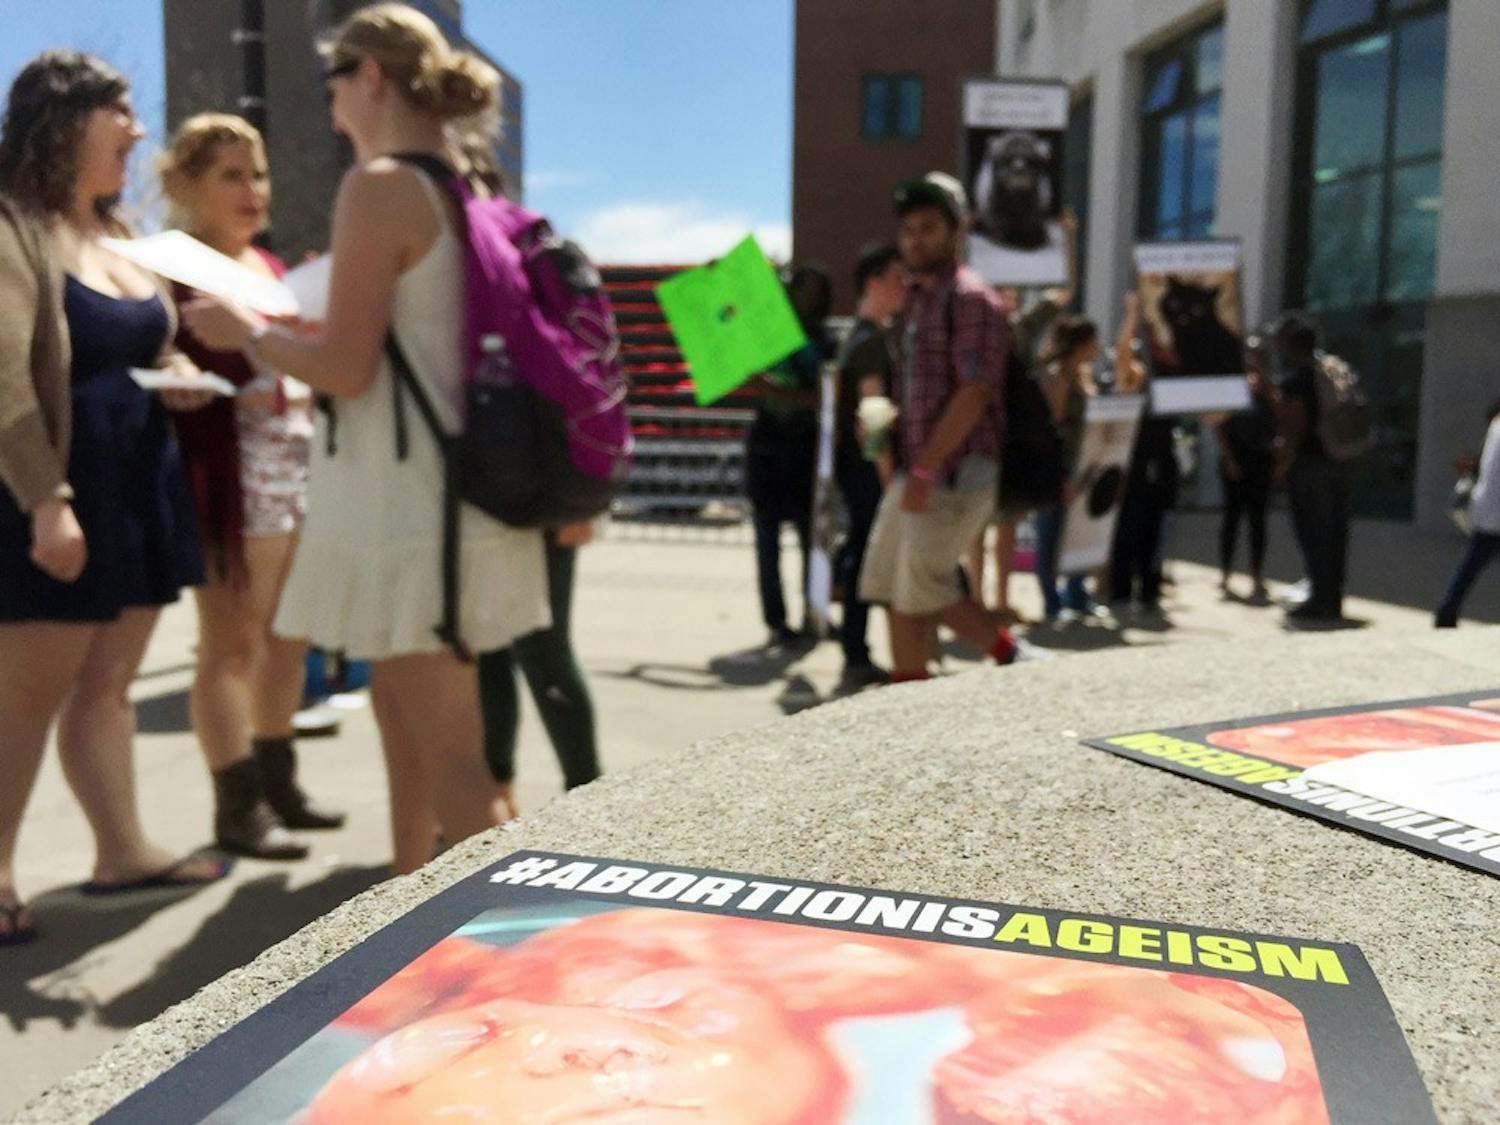 This Thursday’s event, hosted by UB Students for Life, used graphic images of abortions to start conversations about the ethics of the practice.